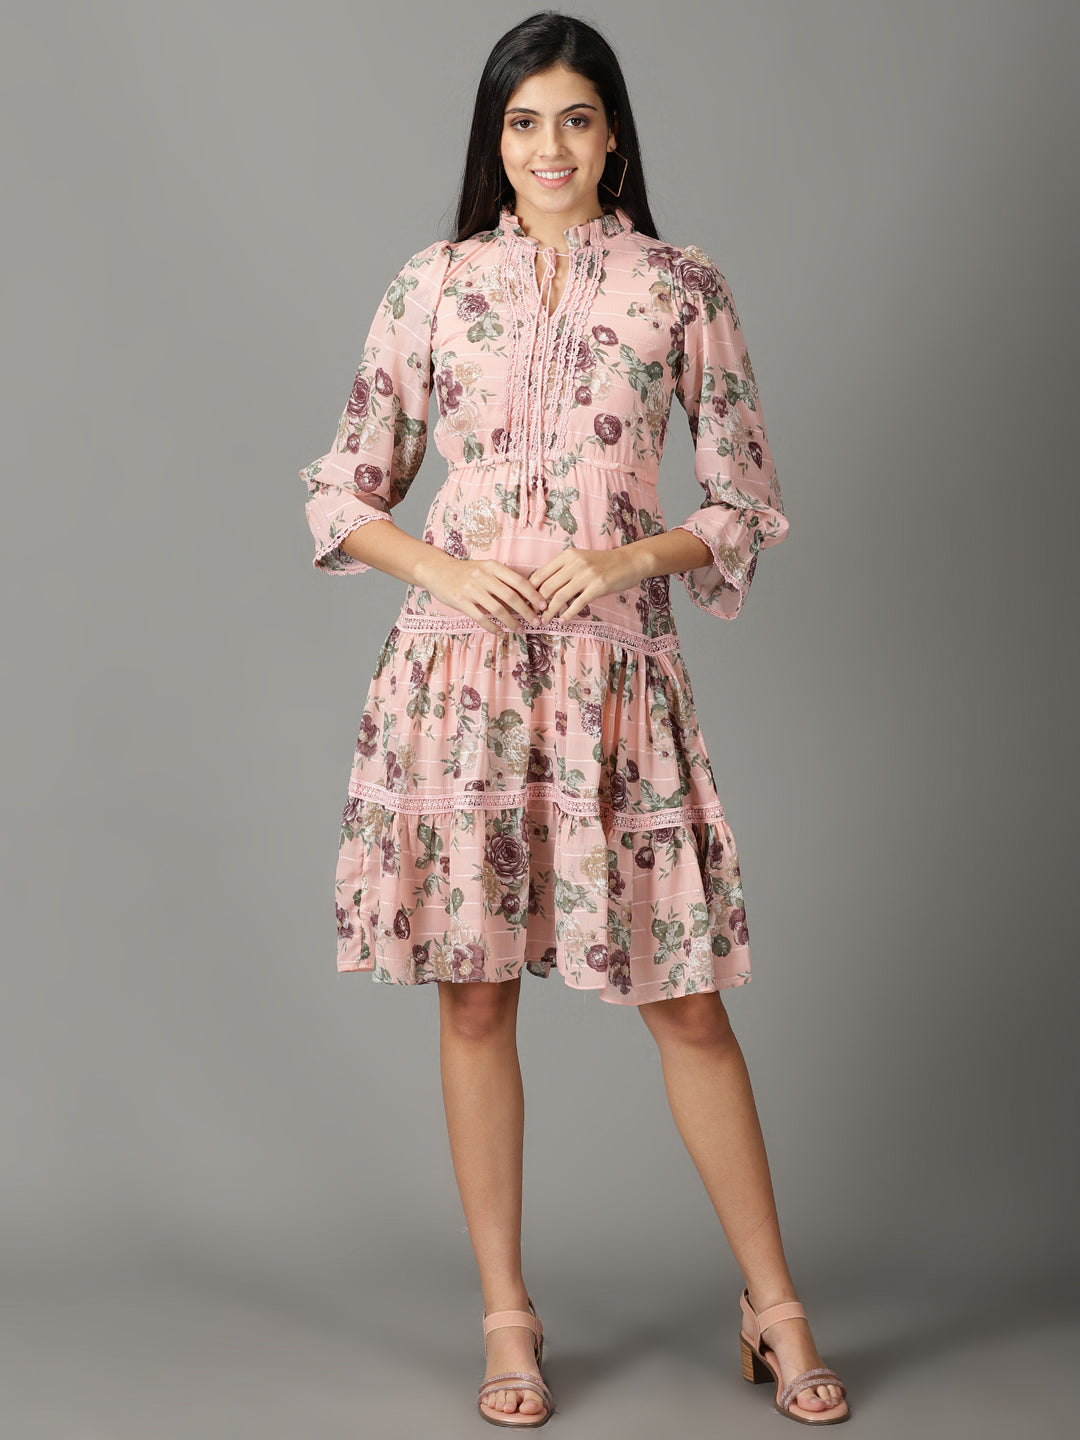 Women's Peach Printed Fit and Flare Dress